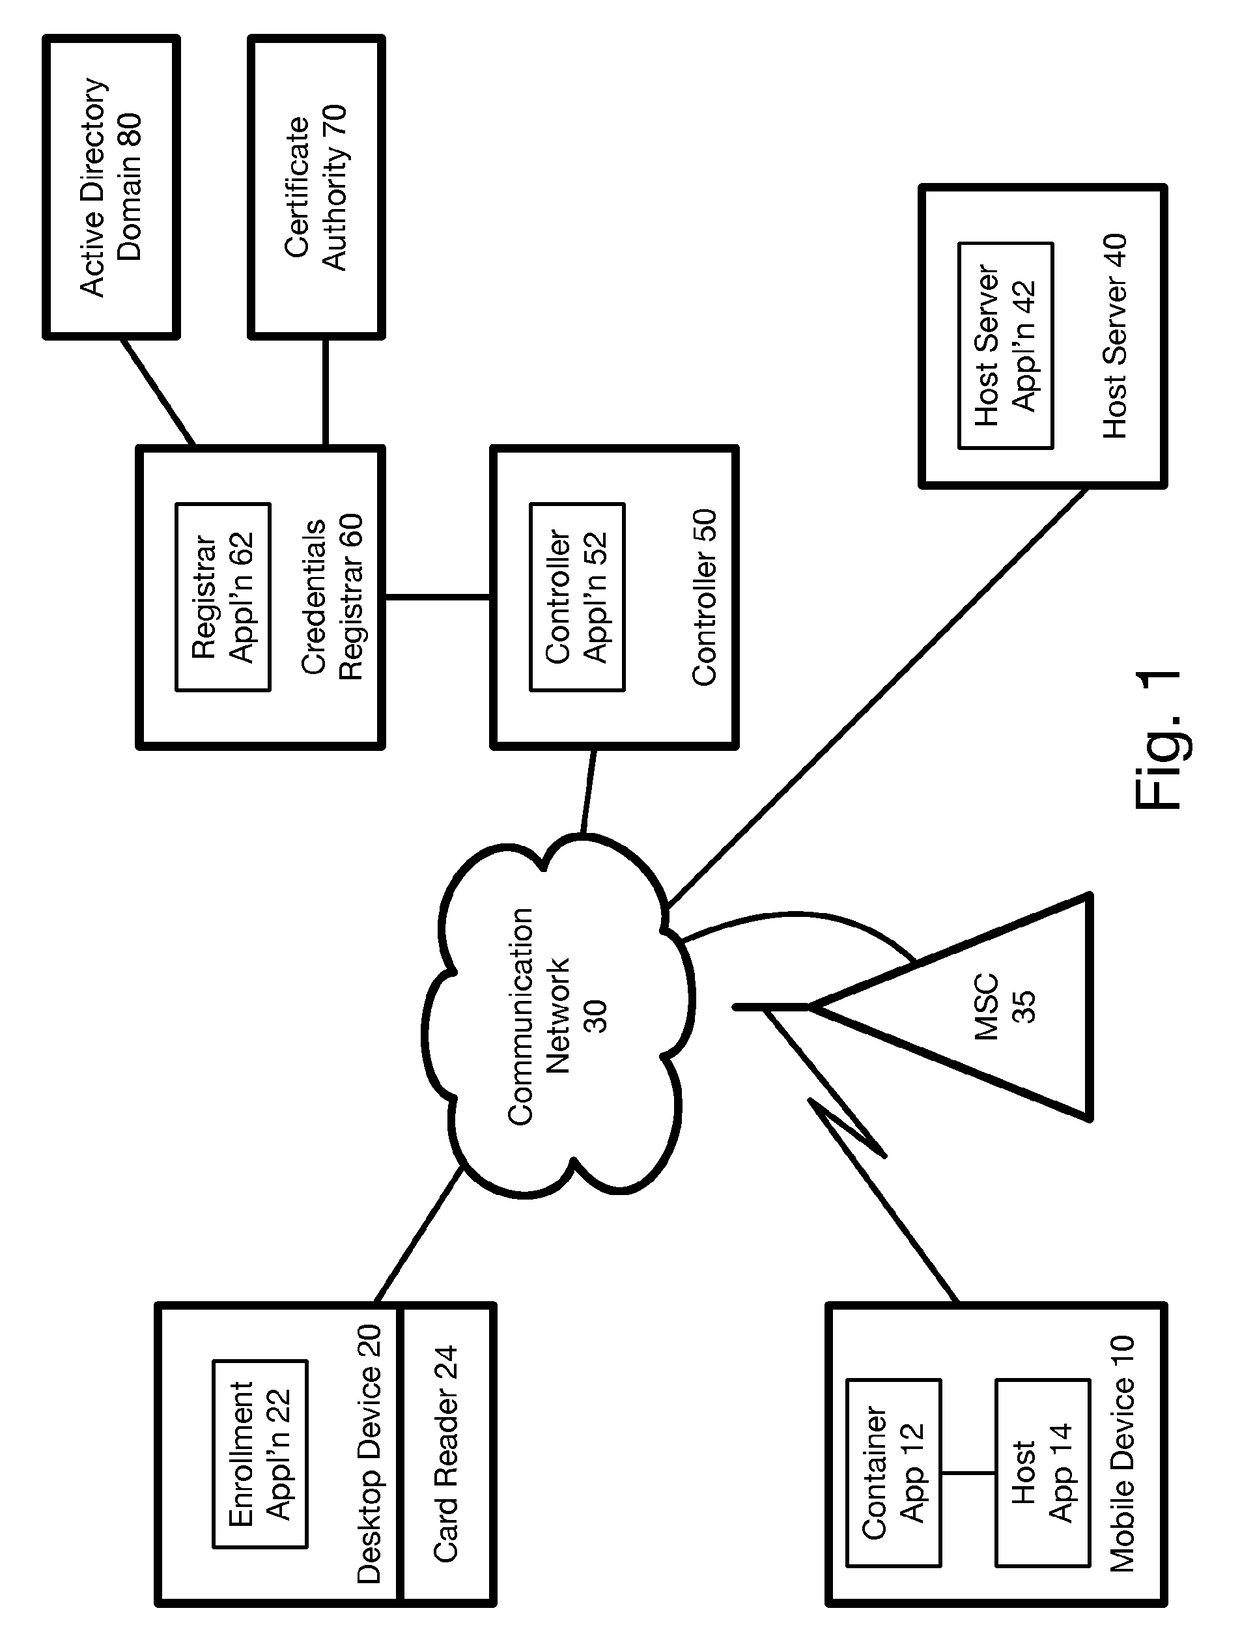 Method and system for issuing and using derived credentials